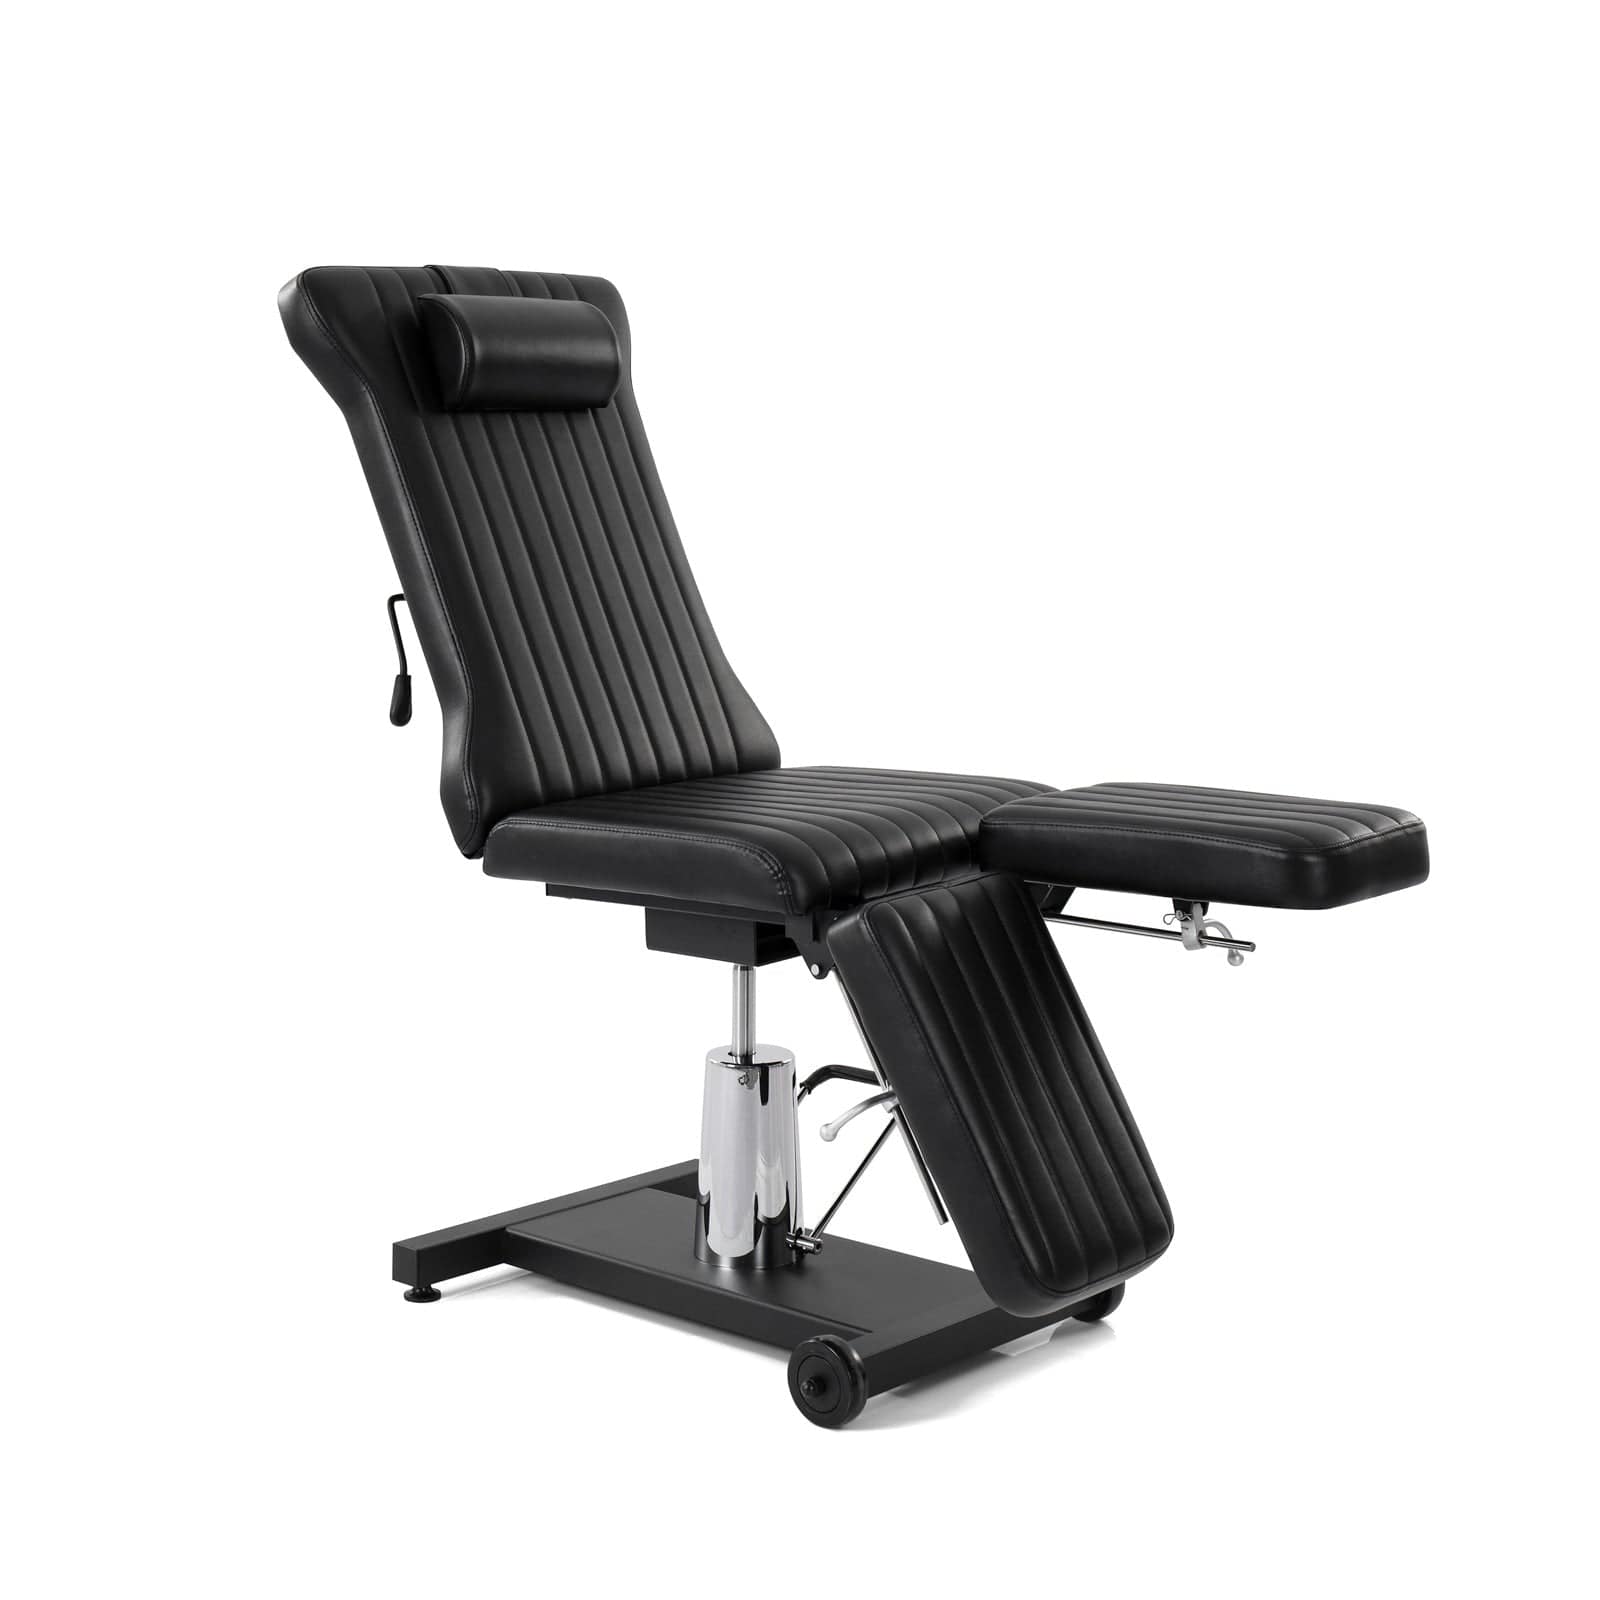 Pro Ink 606 black electric tattoo chair | BeautyX.ee